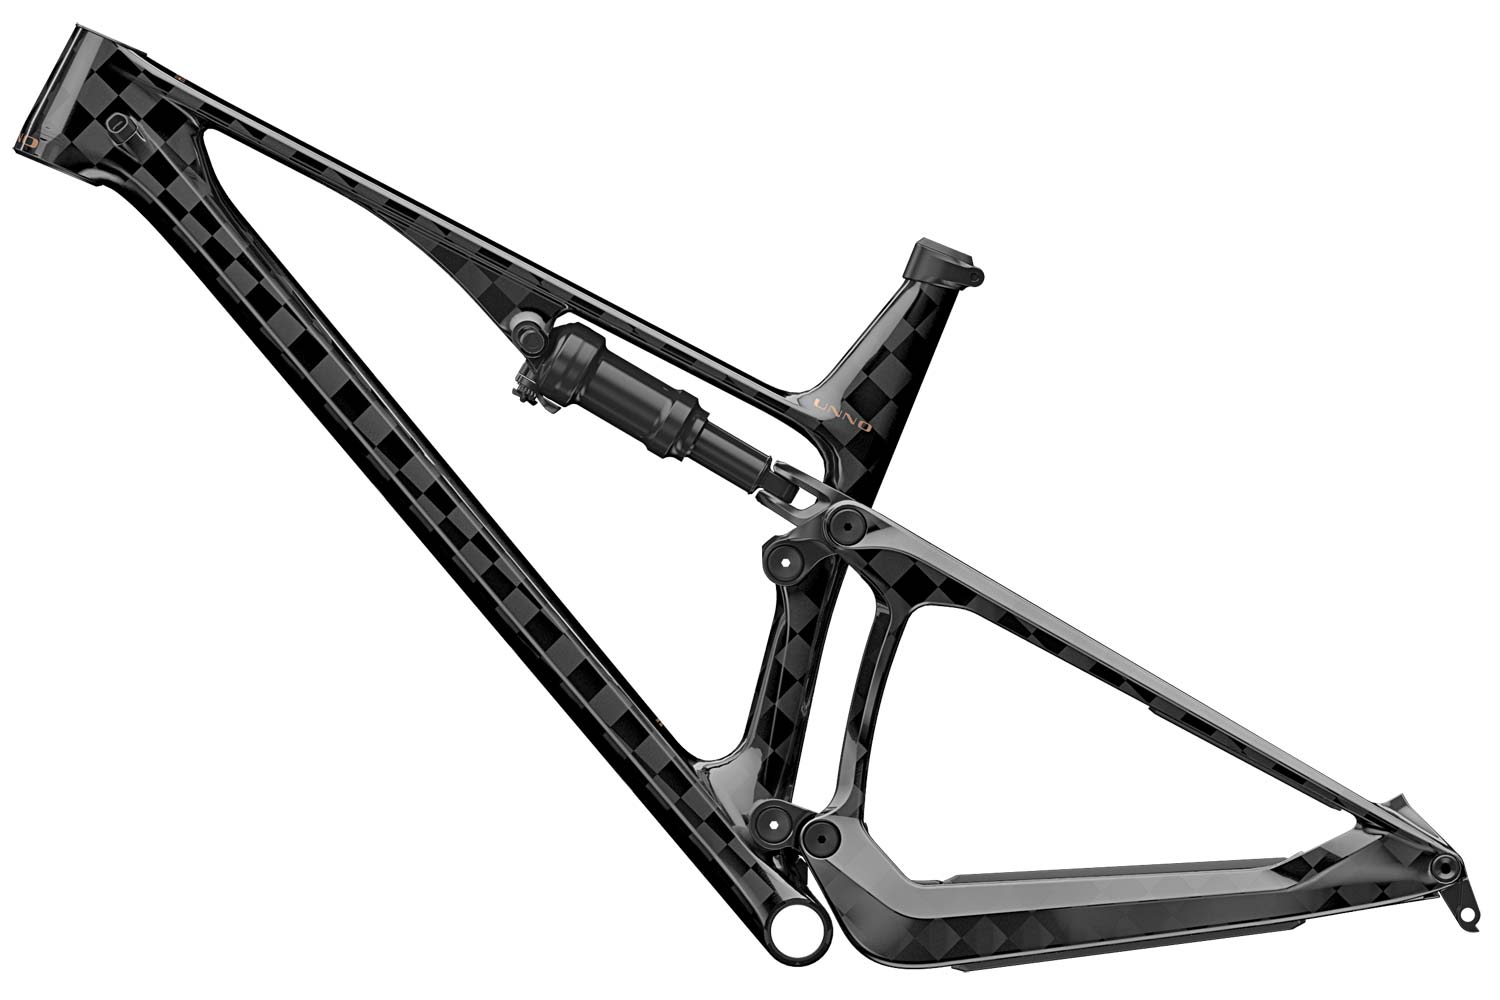 Unno Horn 100mm XC bike, limited edition lightweight carbon short-travel cross-country race mountain bike